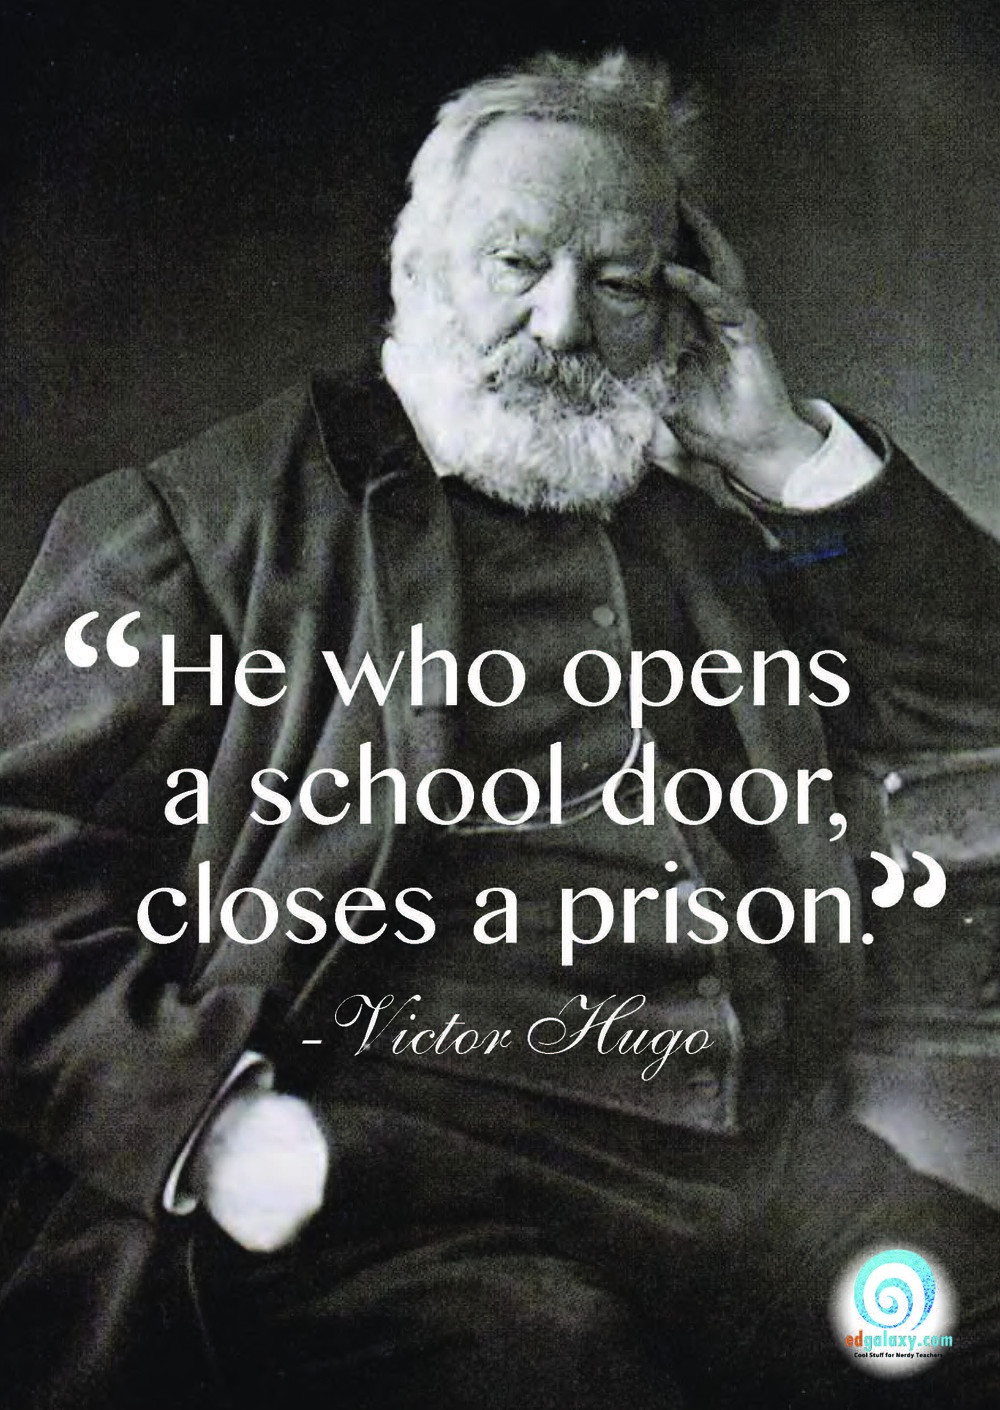 Famous Quotes About Education
 From Famous People Quotes About Teachers QuotesGram